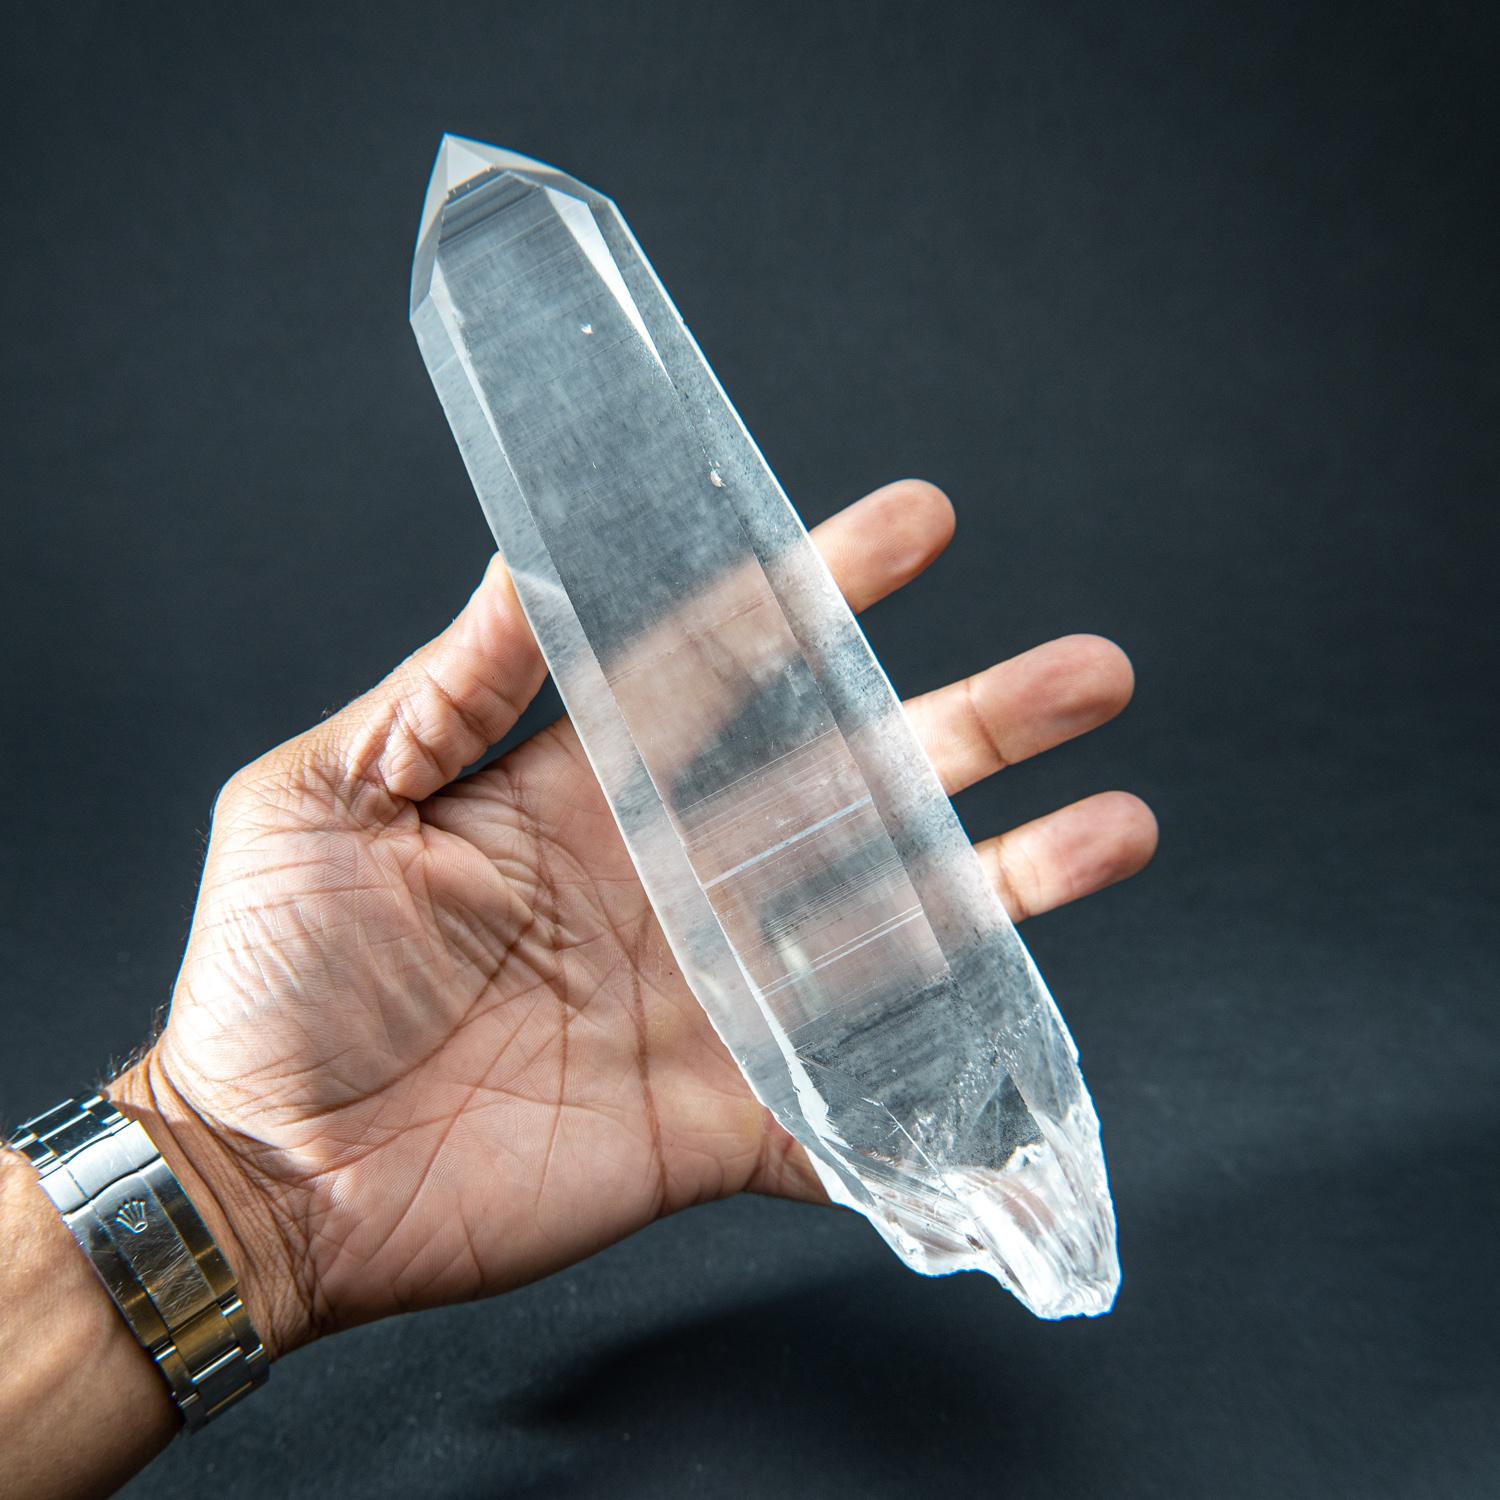 This natural 1.65 lb Brazilian Lemurian Quartz is a large single specimen, featuring transparency and an intact termination. No damage is present, and the crystal is unpolished. Clear Quartz is famously known as the 